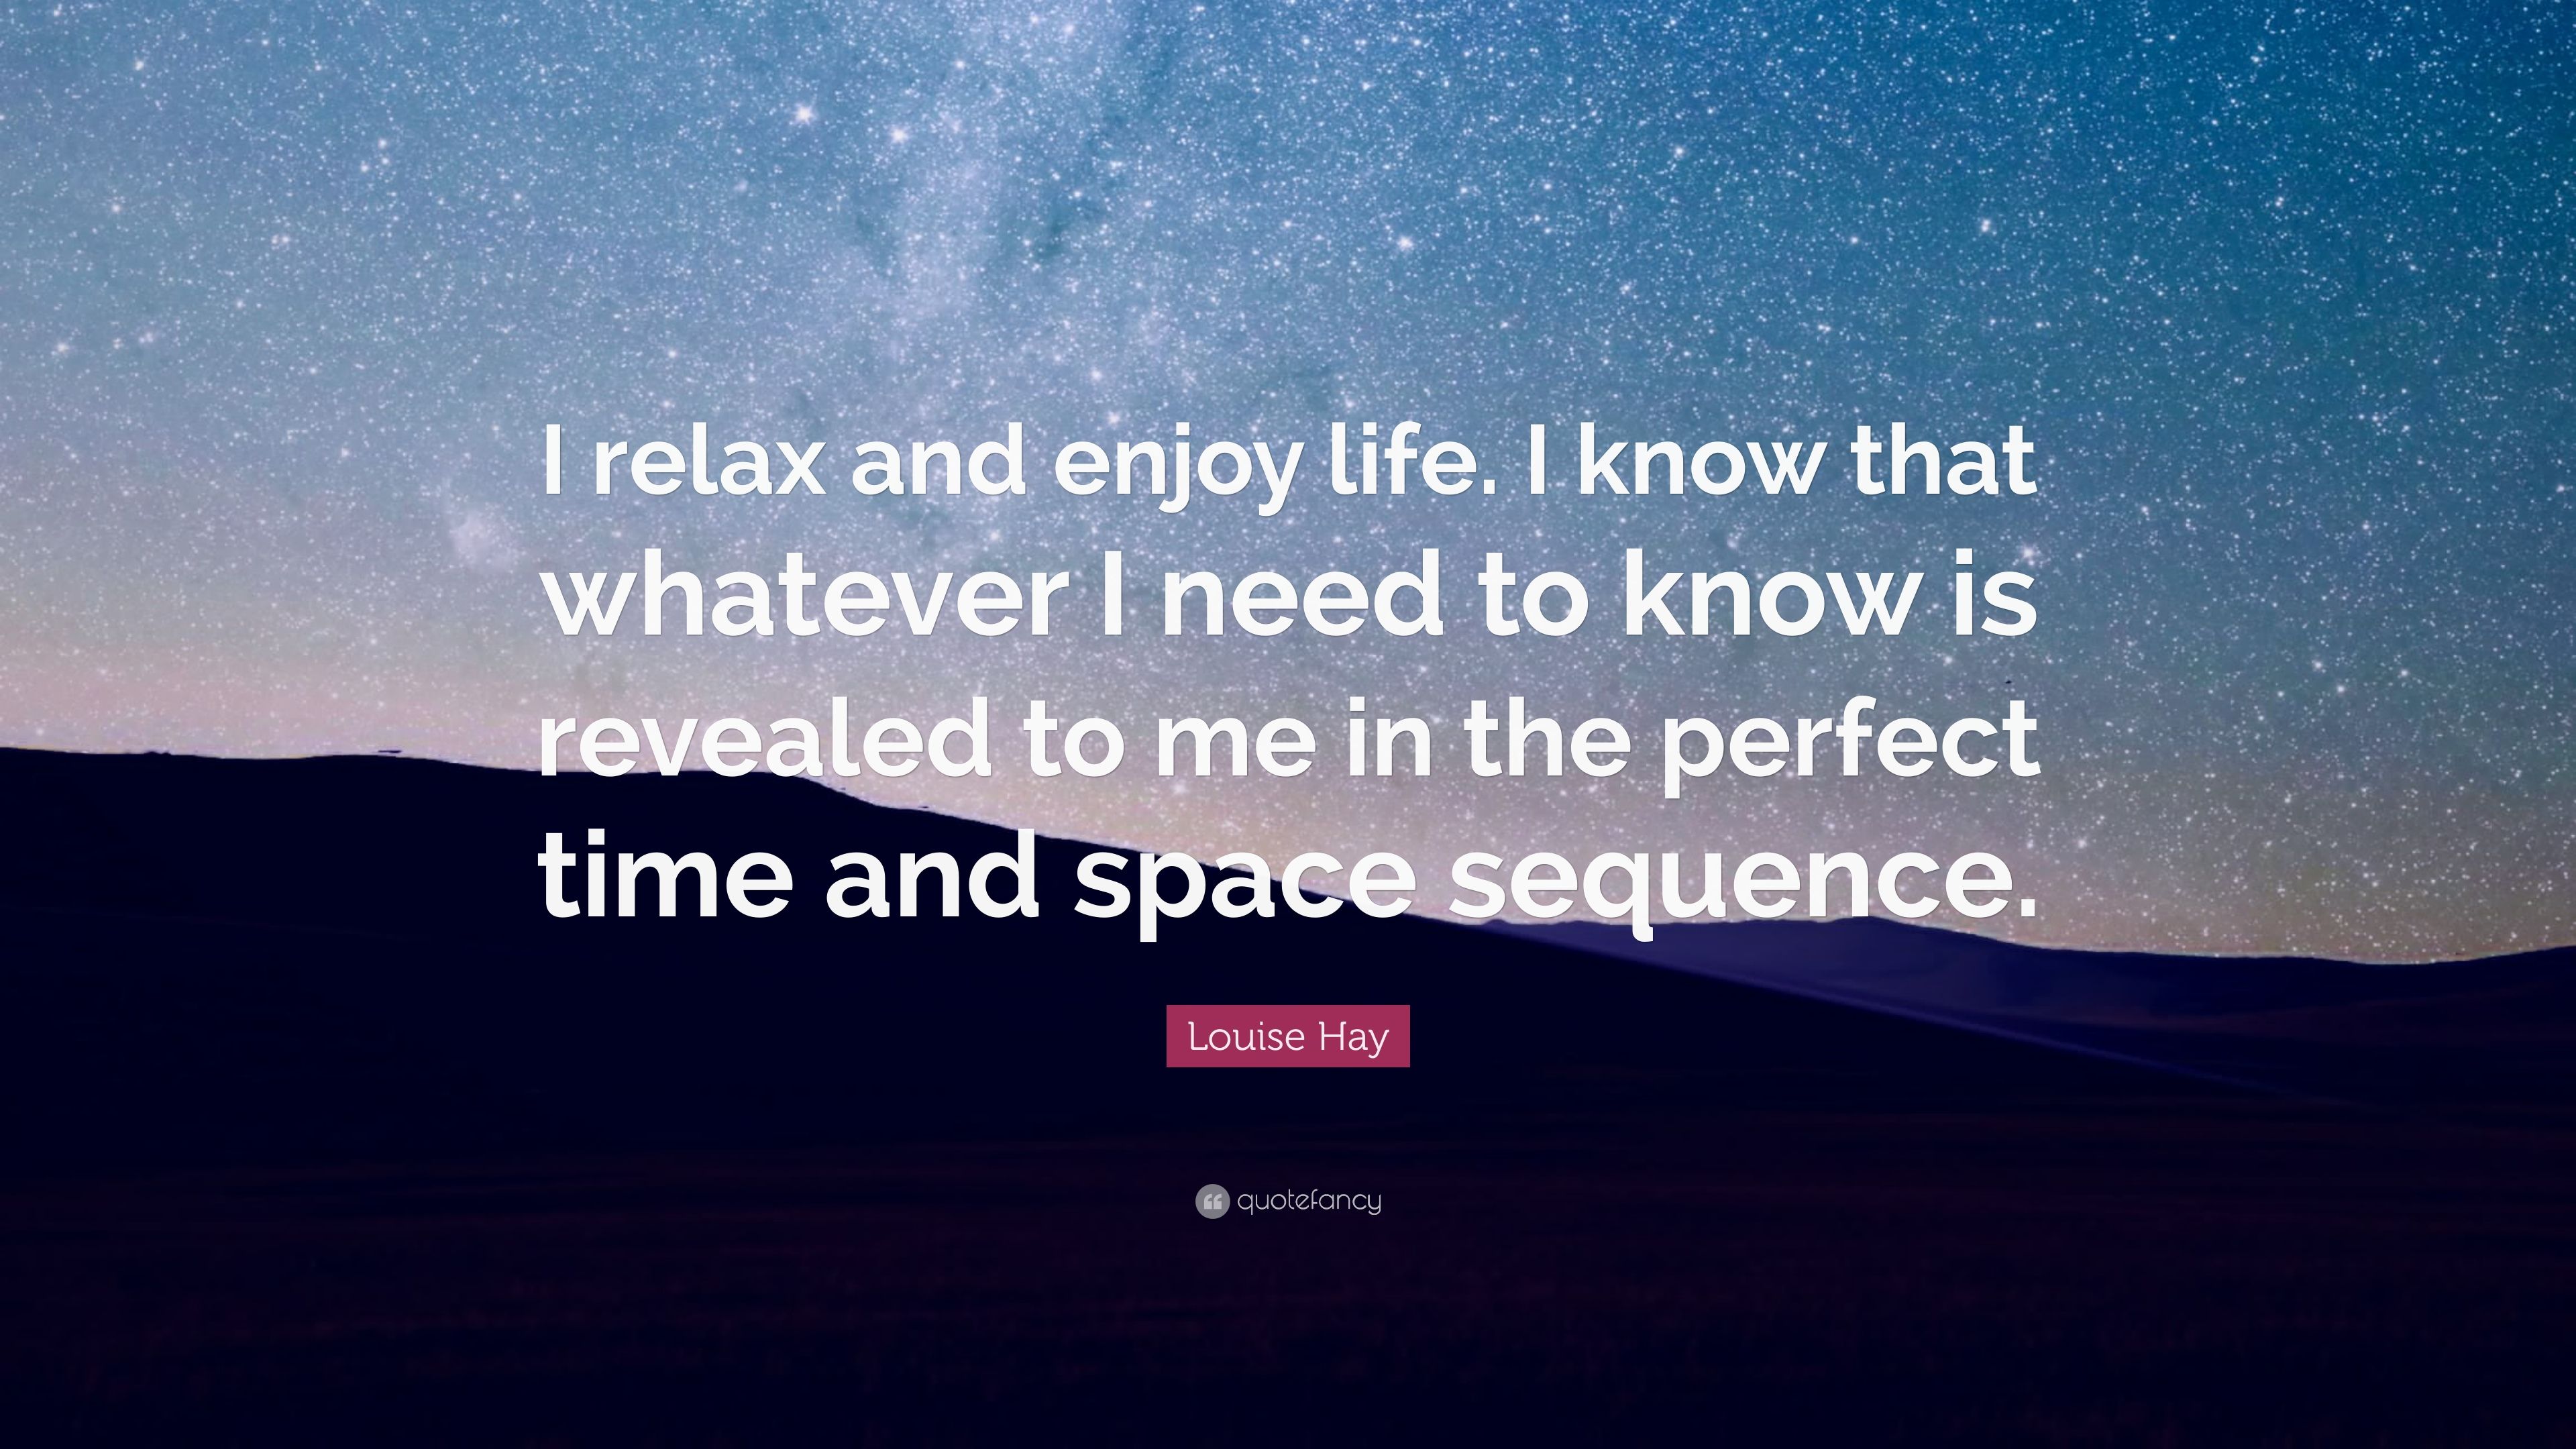 Louise Hay Quote: “I relax and enjoy life. I know that whatever I